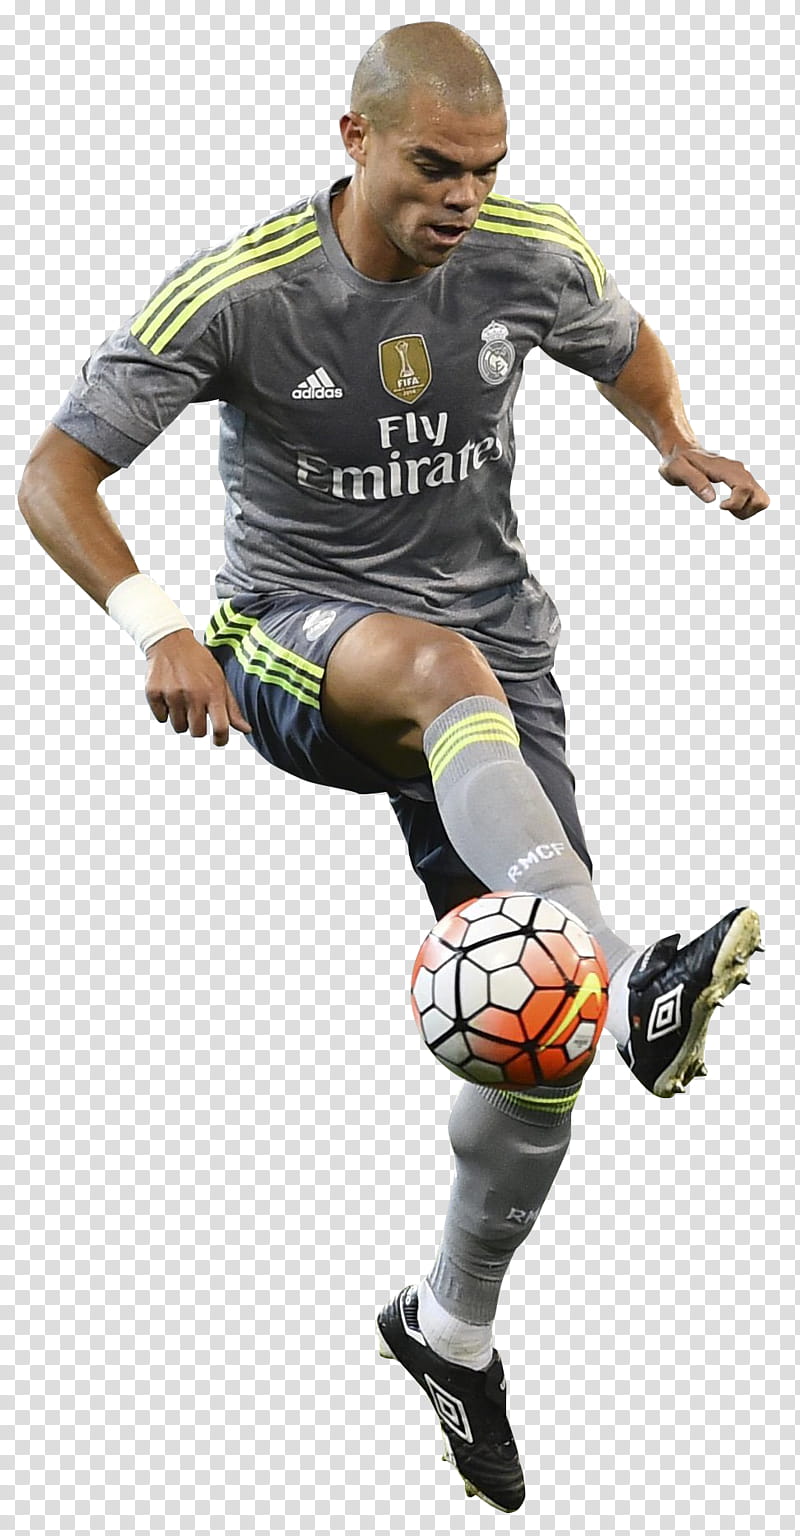 American Football, Pepe, Real Madrid CF, Soccer Player, Football Player, Uefa Champions League, Sergio Ramos, Marcelo Vieira transparent background PNG clipart